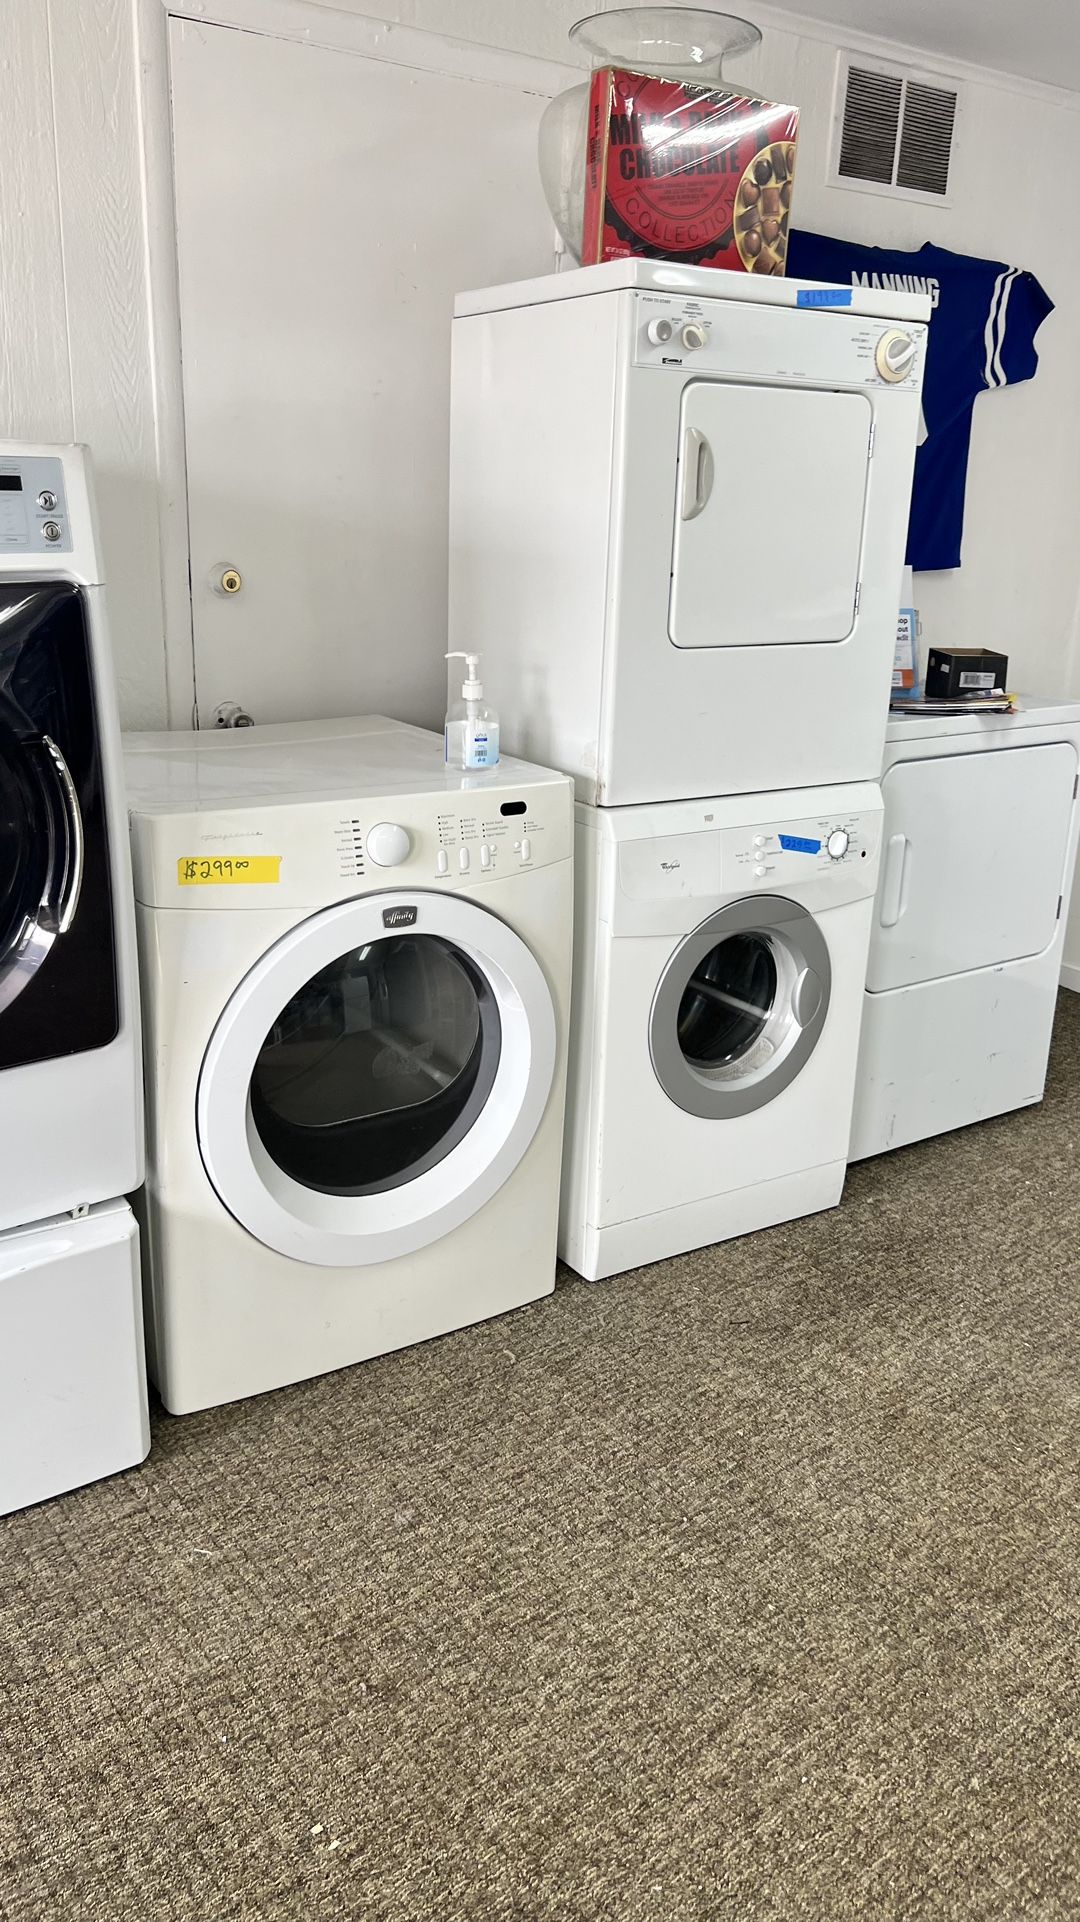 Stackable Washer Dryer Discount Sale $59 Down